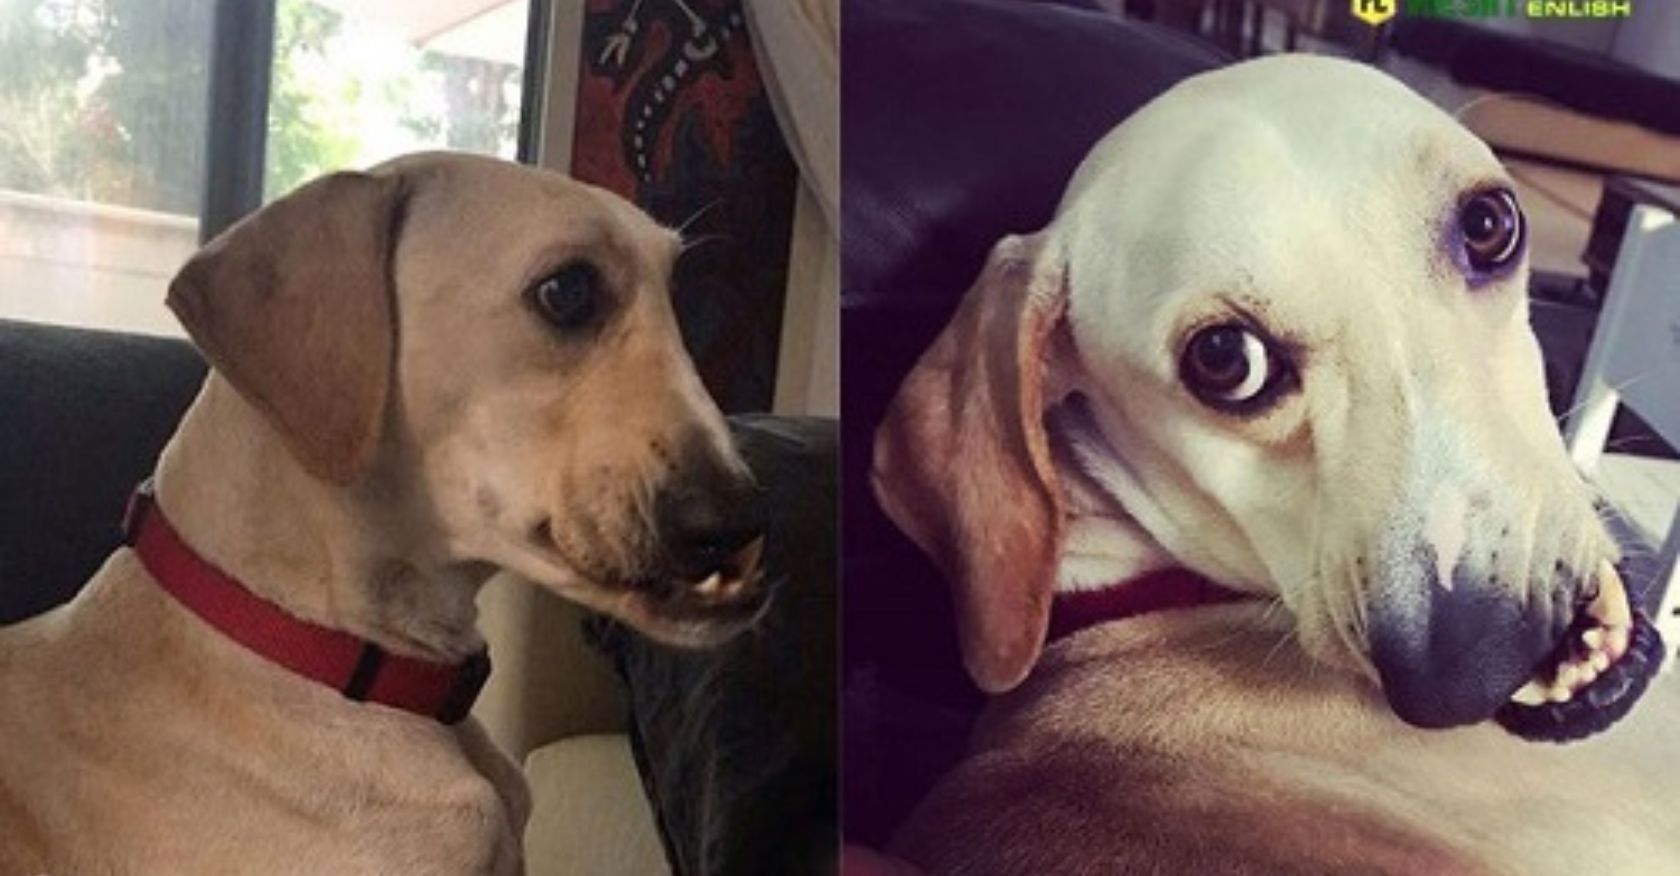 A dog’s uniquely curved face gives it a distinctive and one-of-a-kind look!